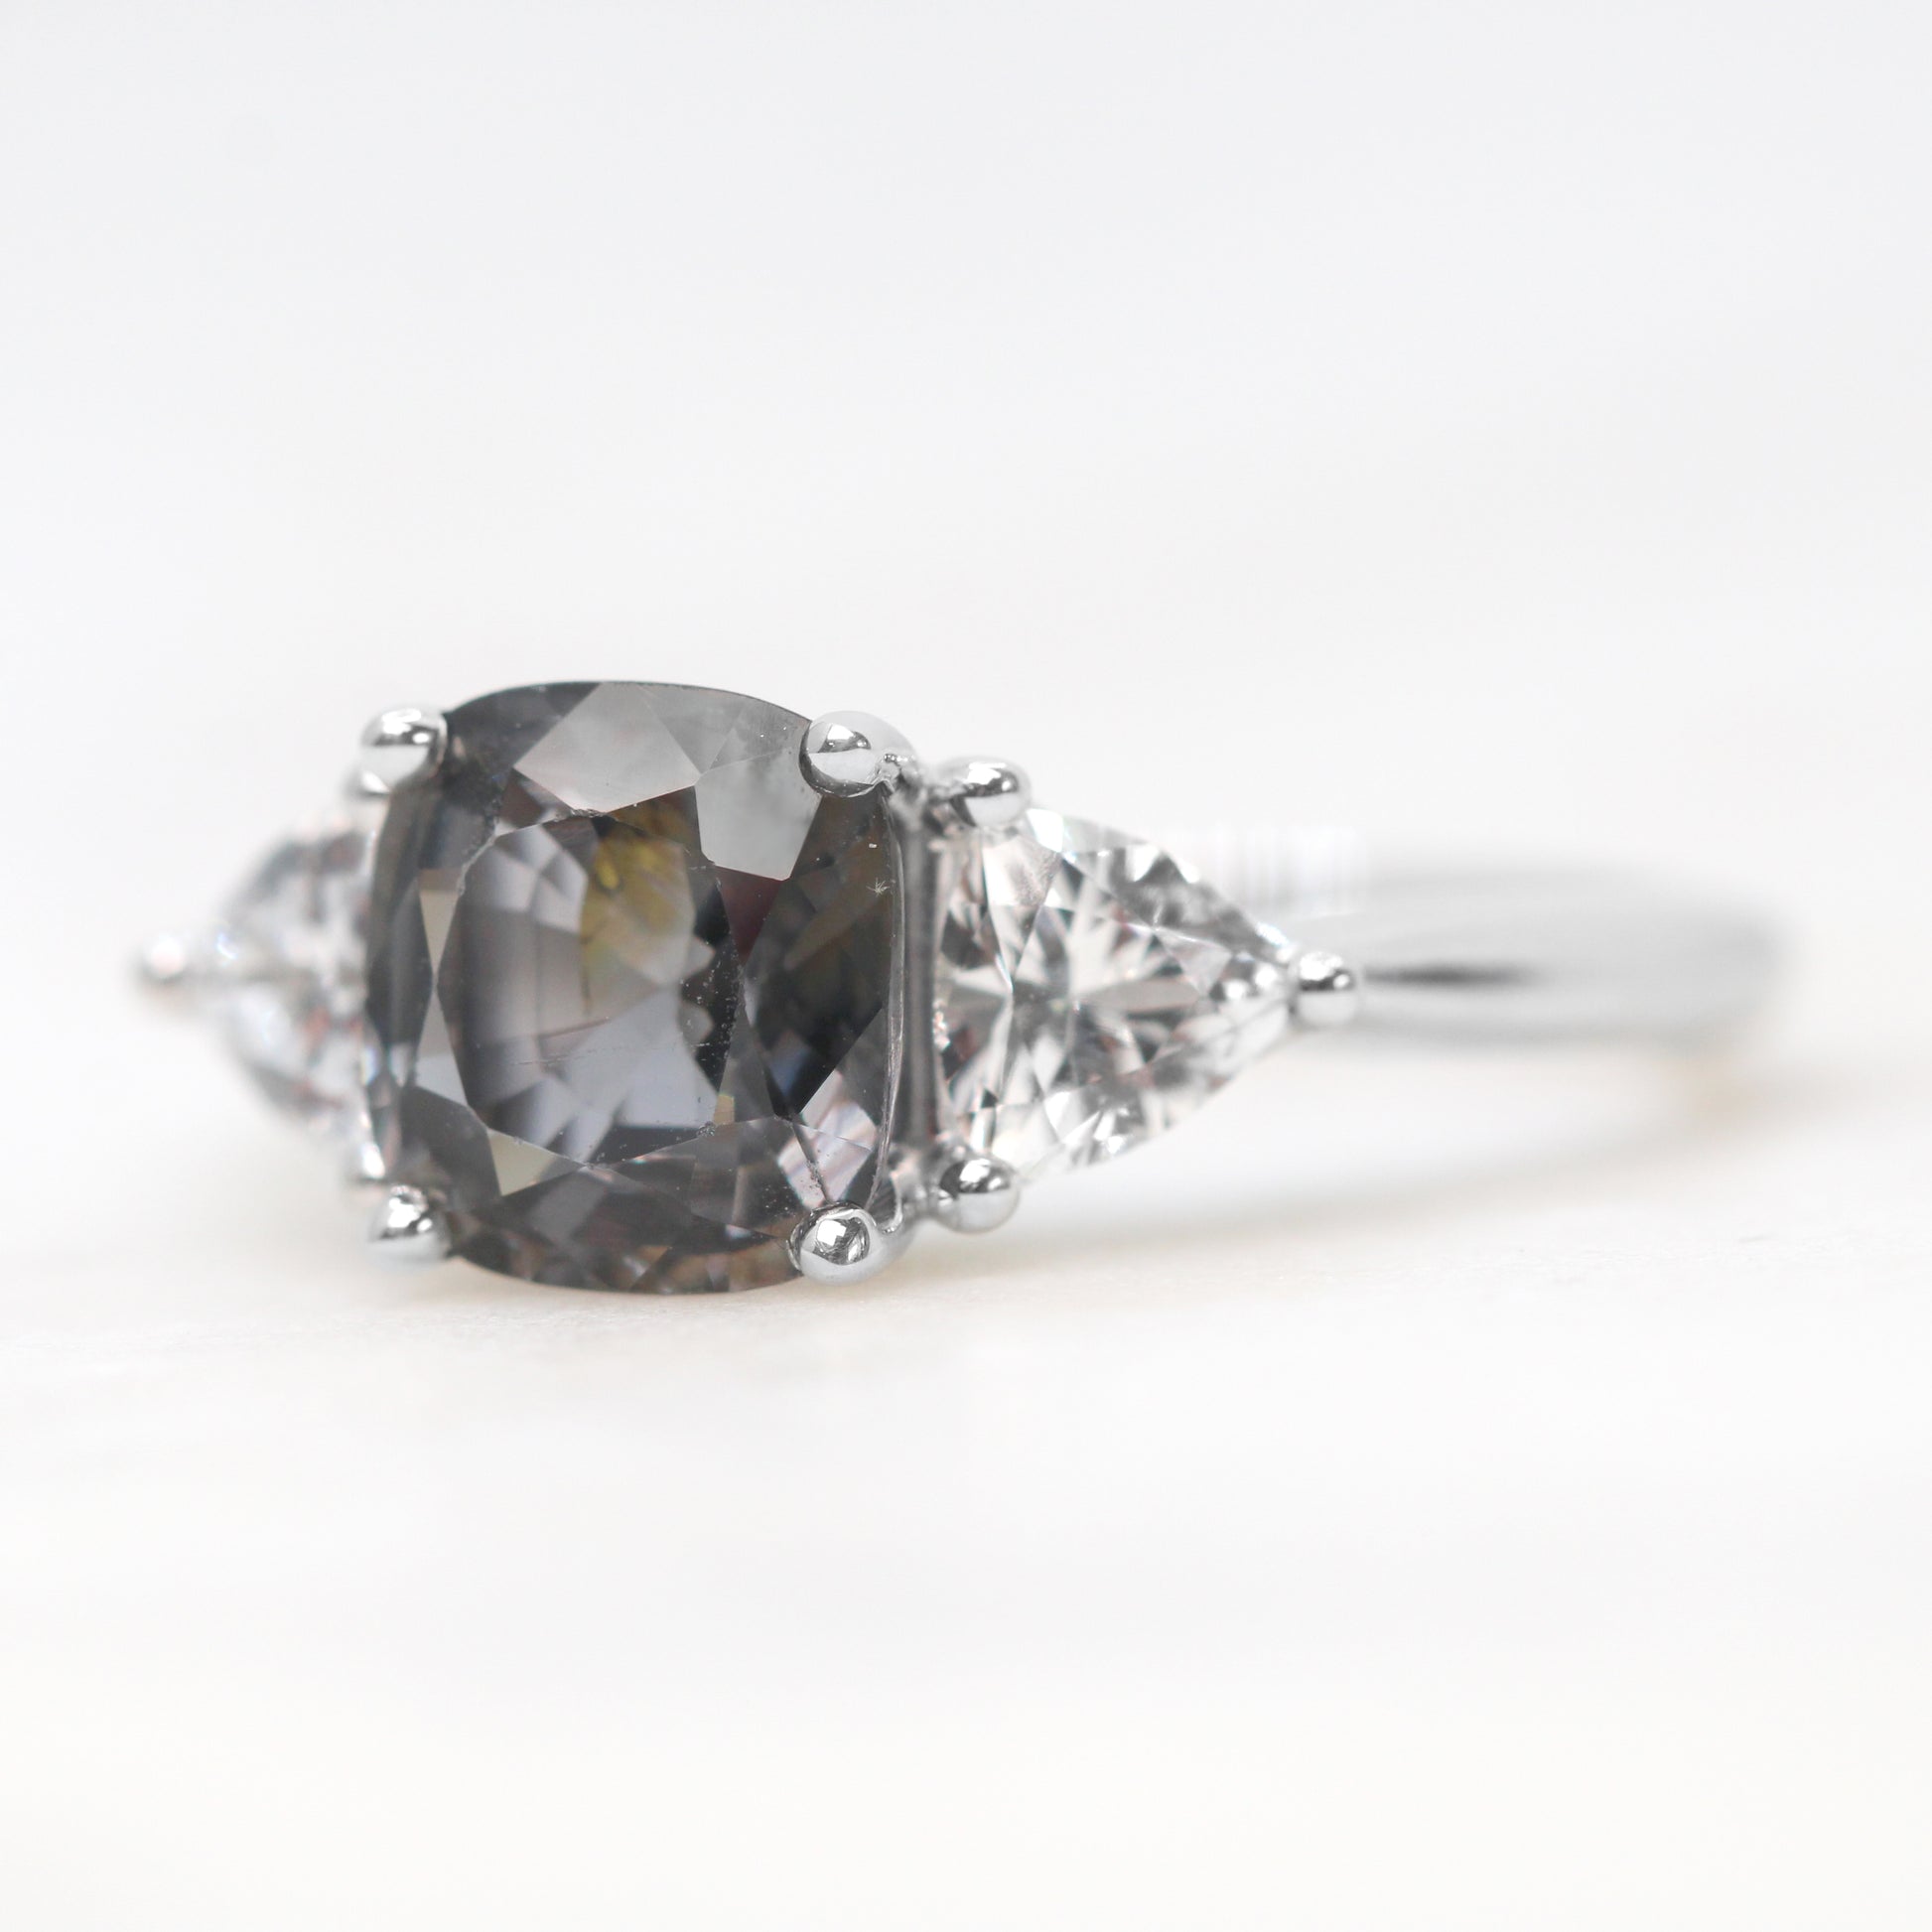 Nolen Ring with 1.98 Carat Cushion Cut Dark Purple Spinel and White Accent Sapphires in 14k White Gold - Ready to Size and Ship - Midwinter Co. Alternative Bridal Rings and Modern Fine Jewelry